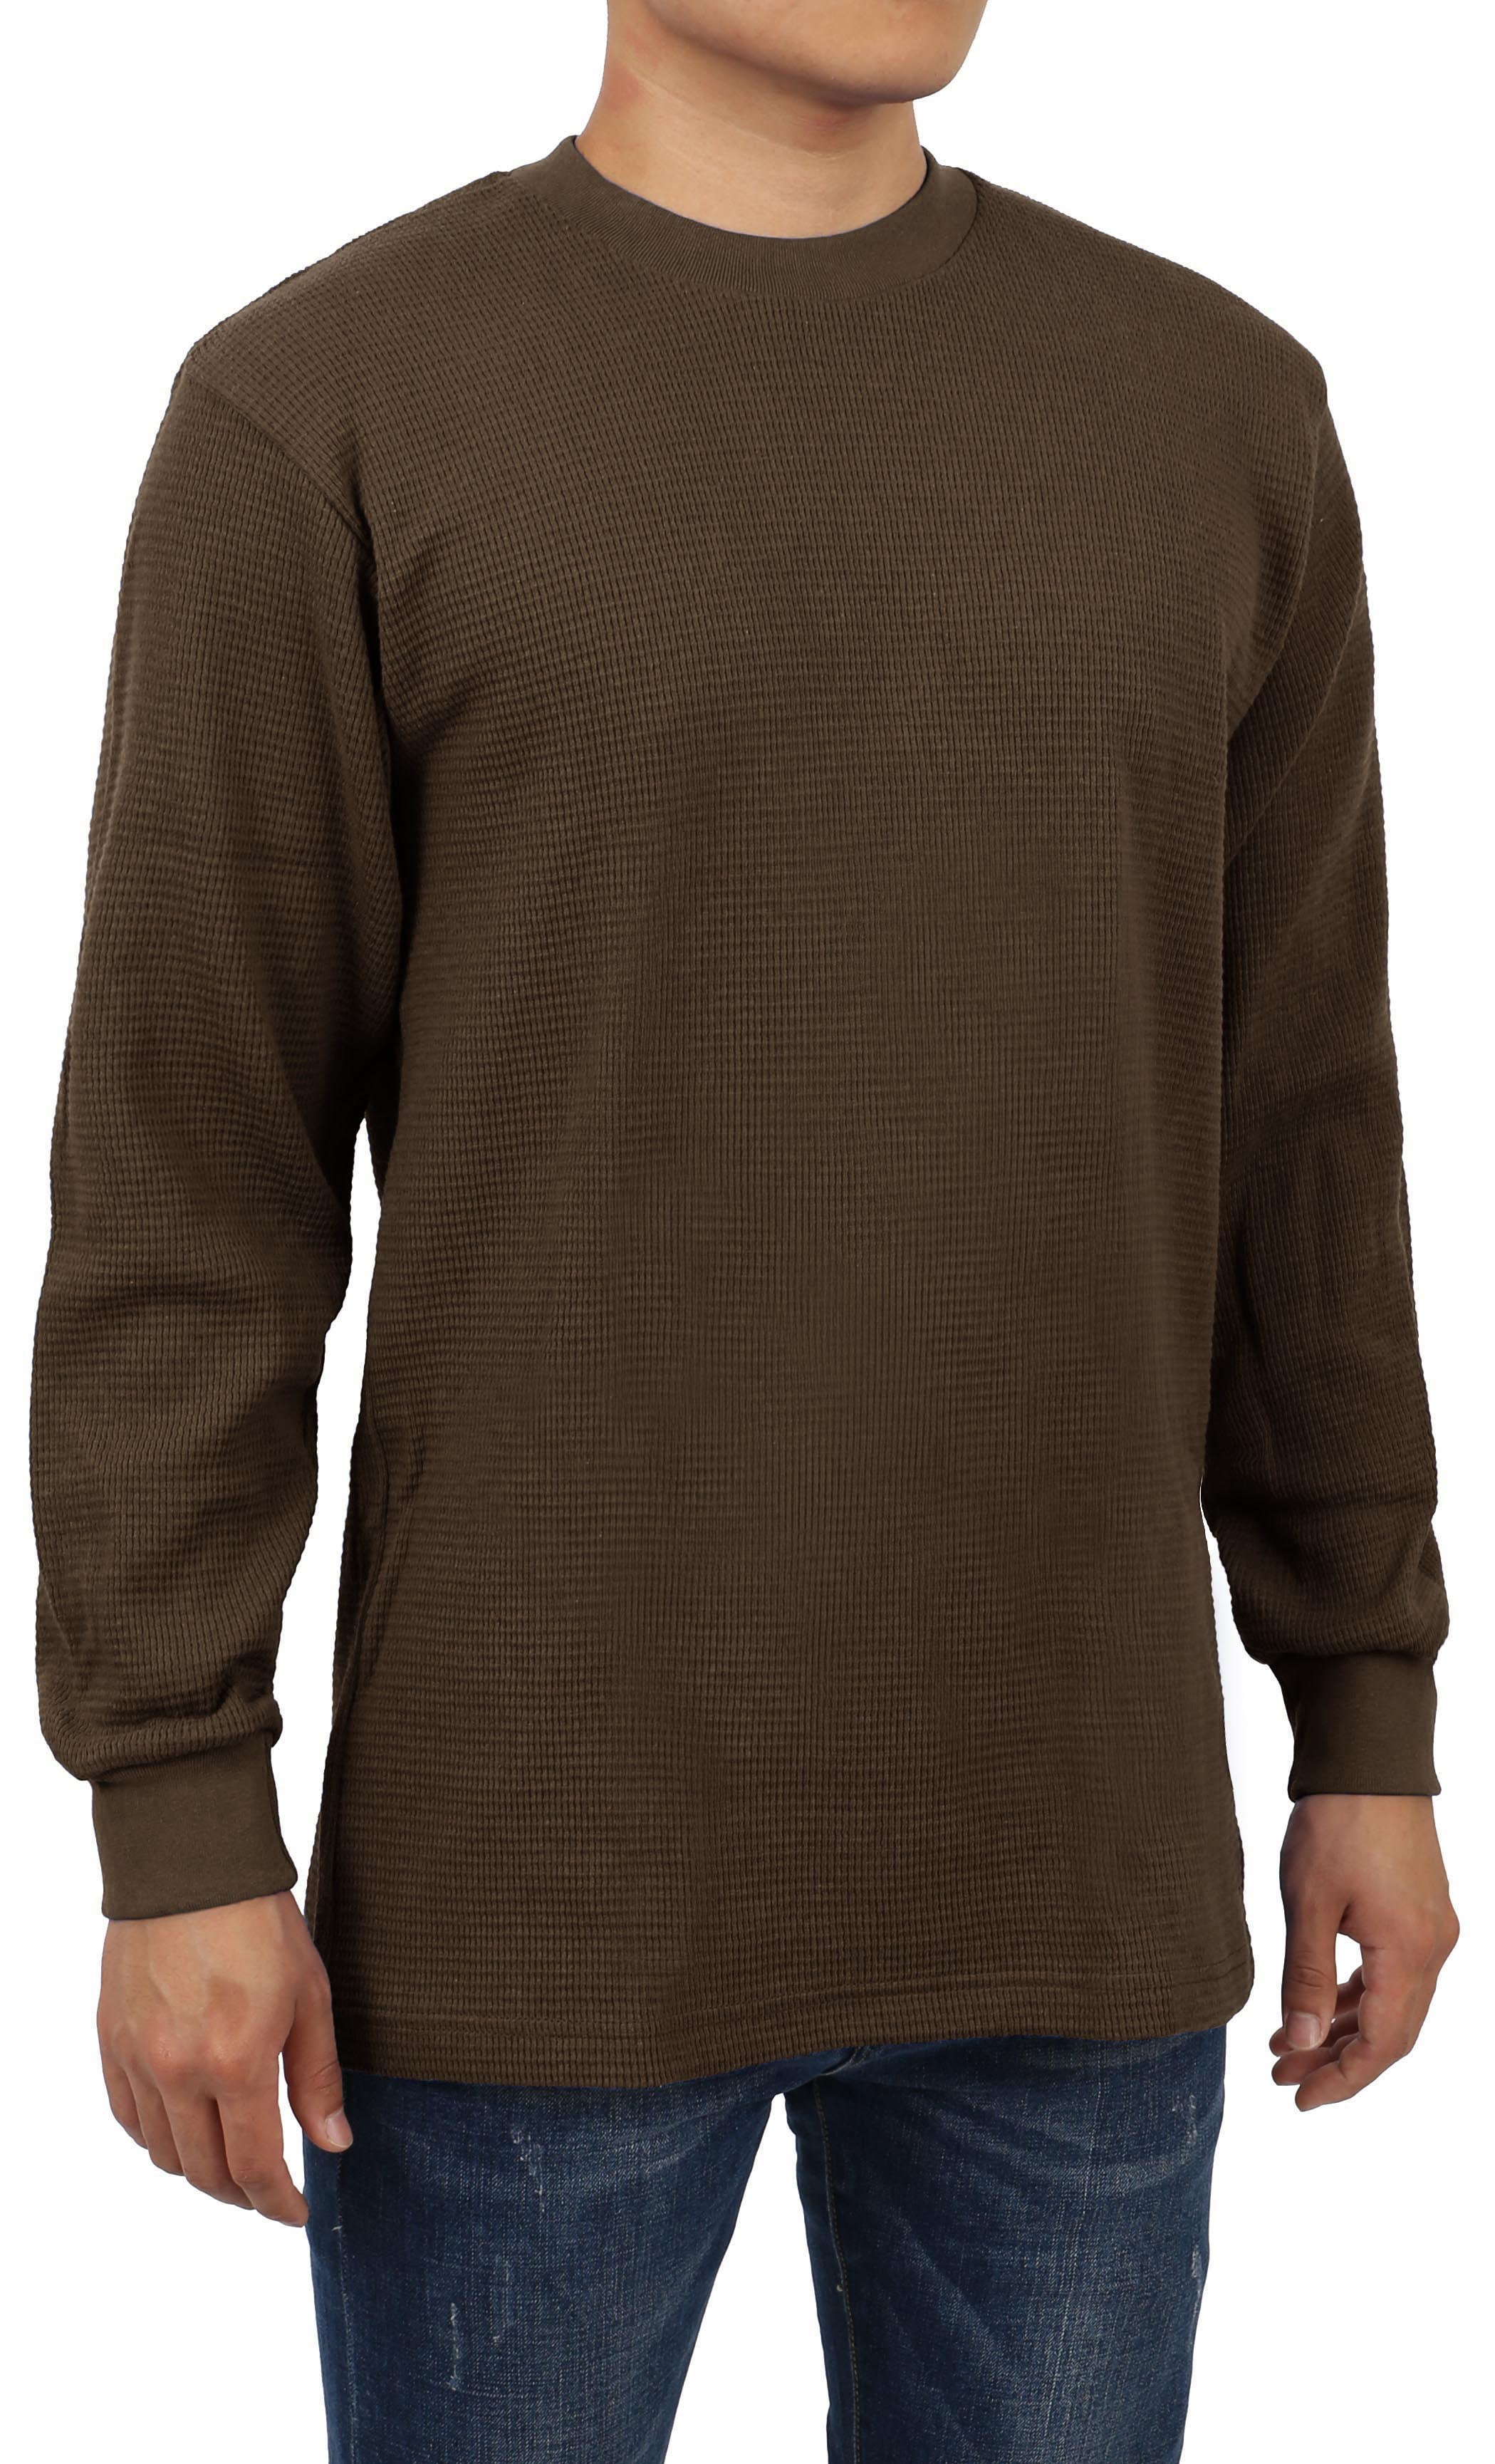 Details about   Mens Heavy T SHIRTS Long Sleeve Waffle Tee THERMAL Cotton Sweater Winter 